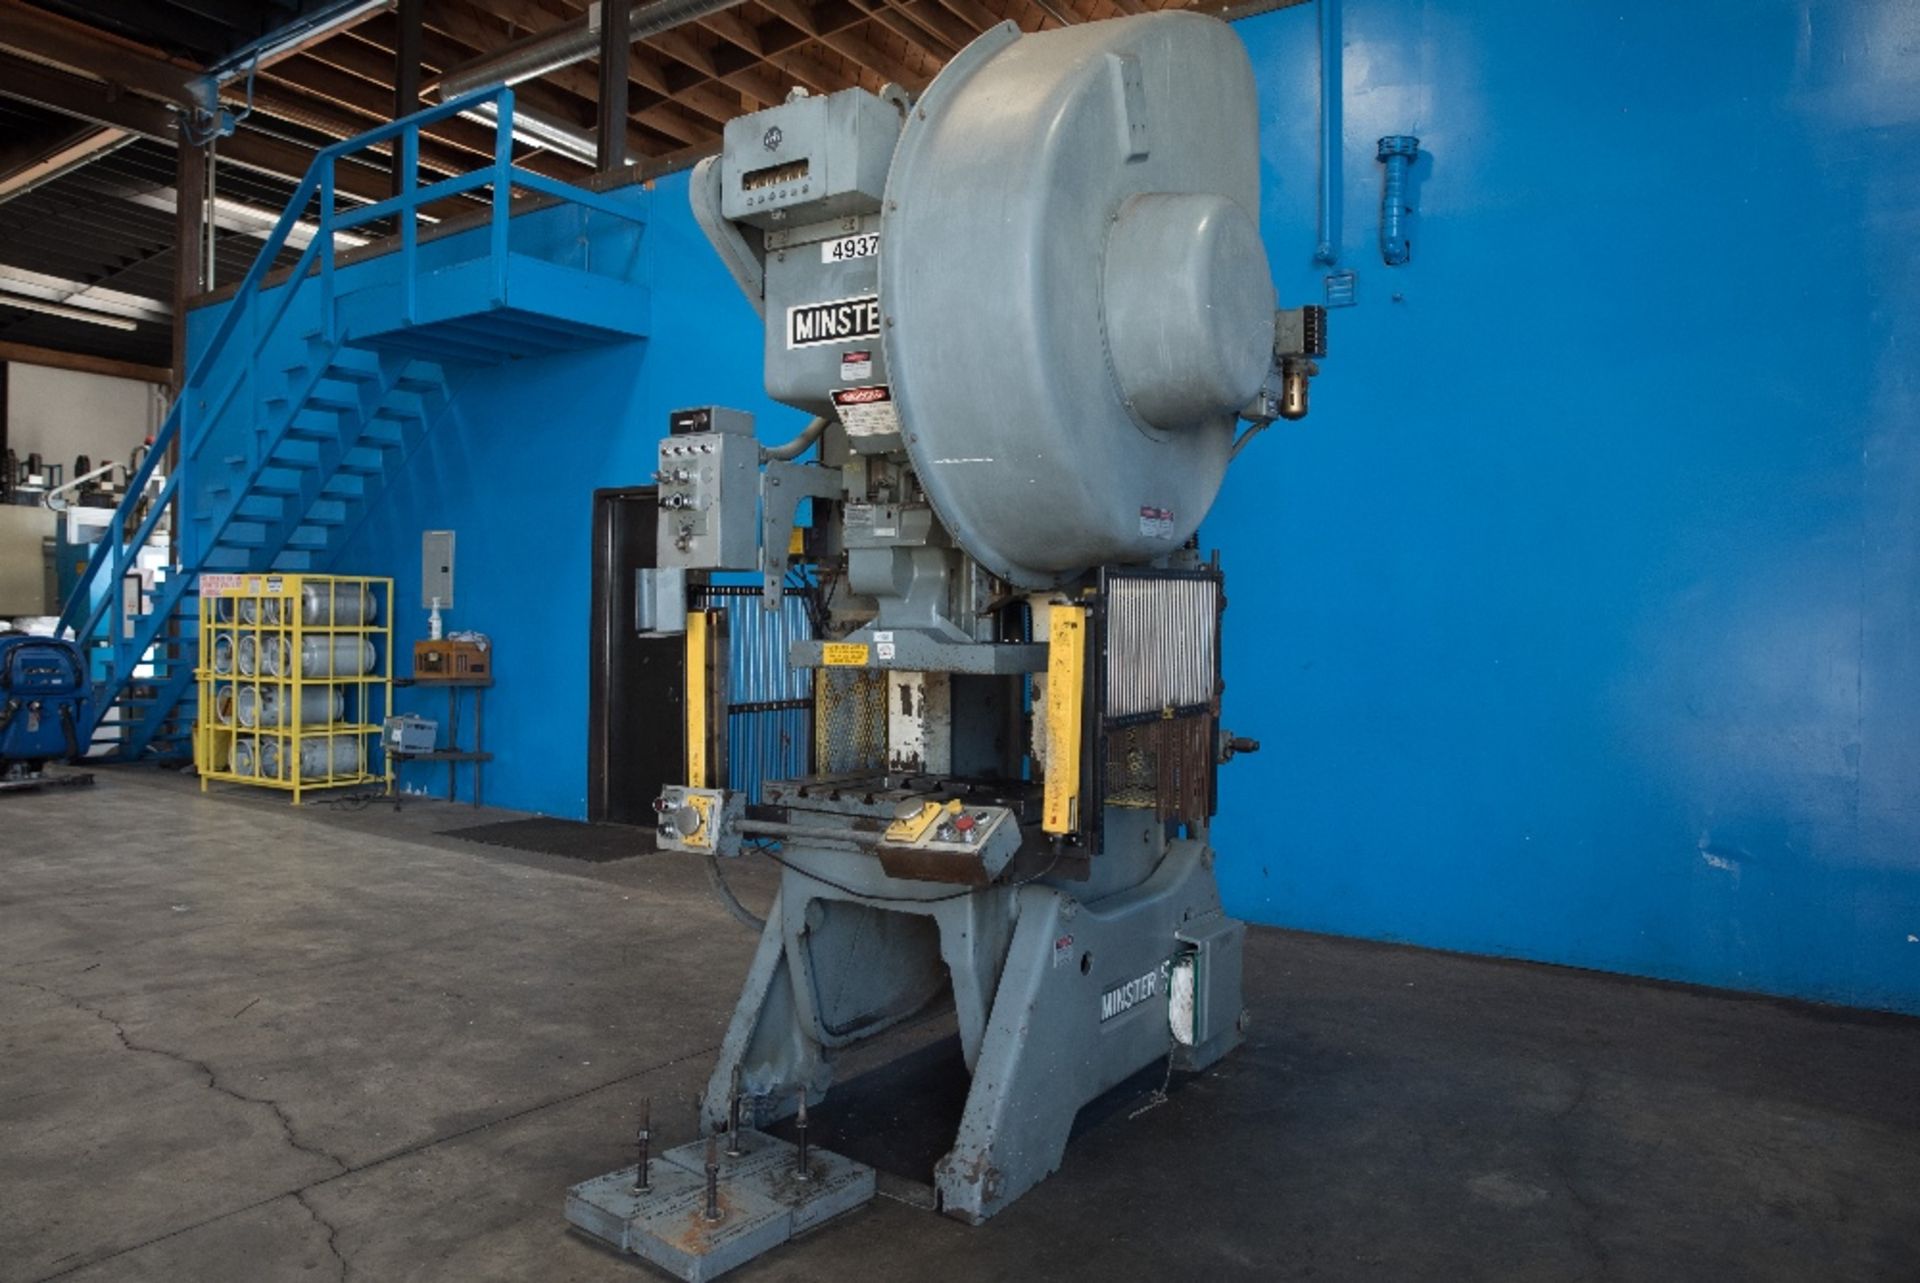 Minster OBI Punch Press 45 Ton x 28'' x 18''. LOADING FEE FOR THIS LOT: $600